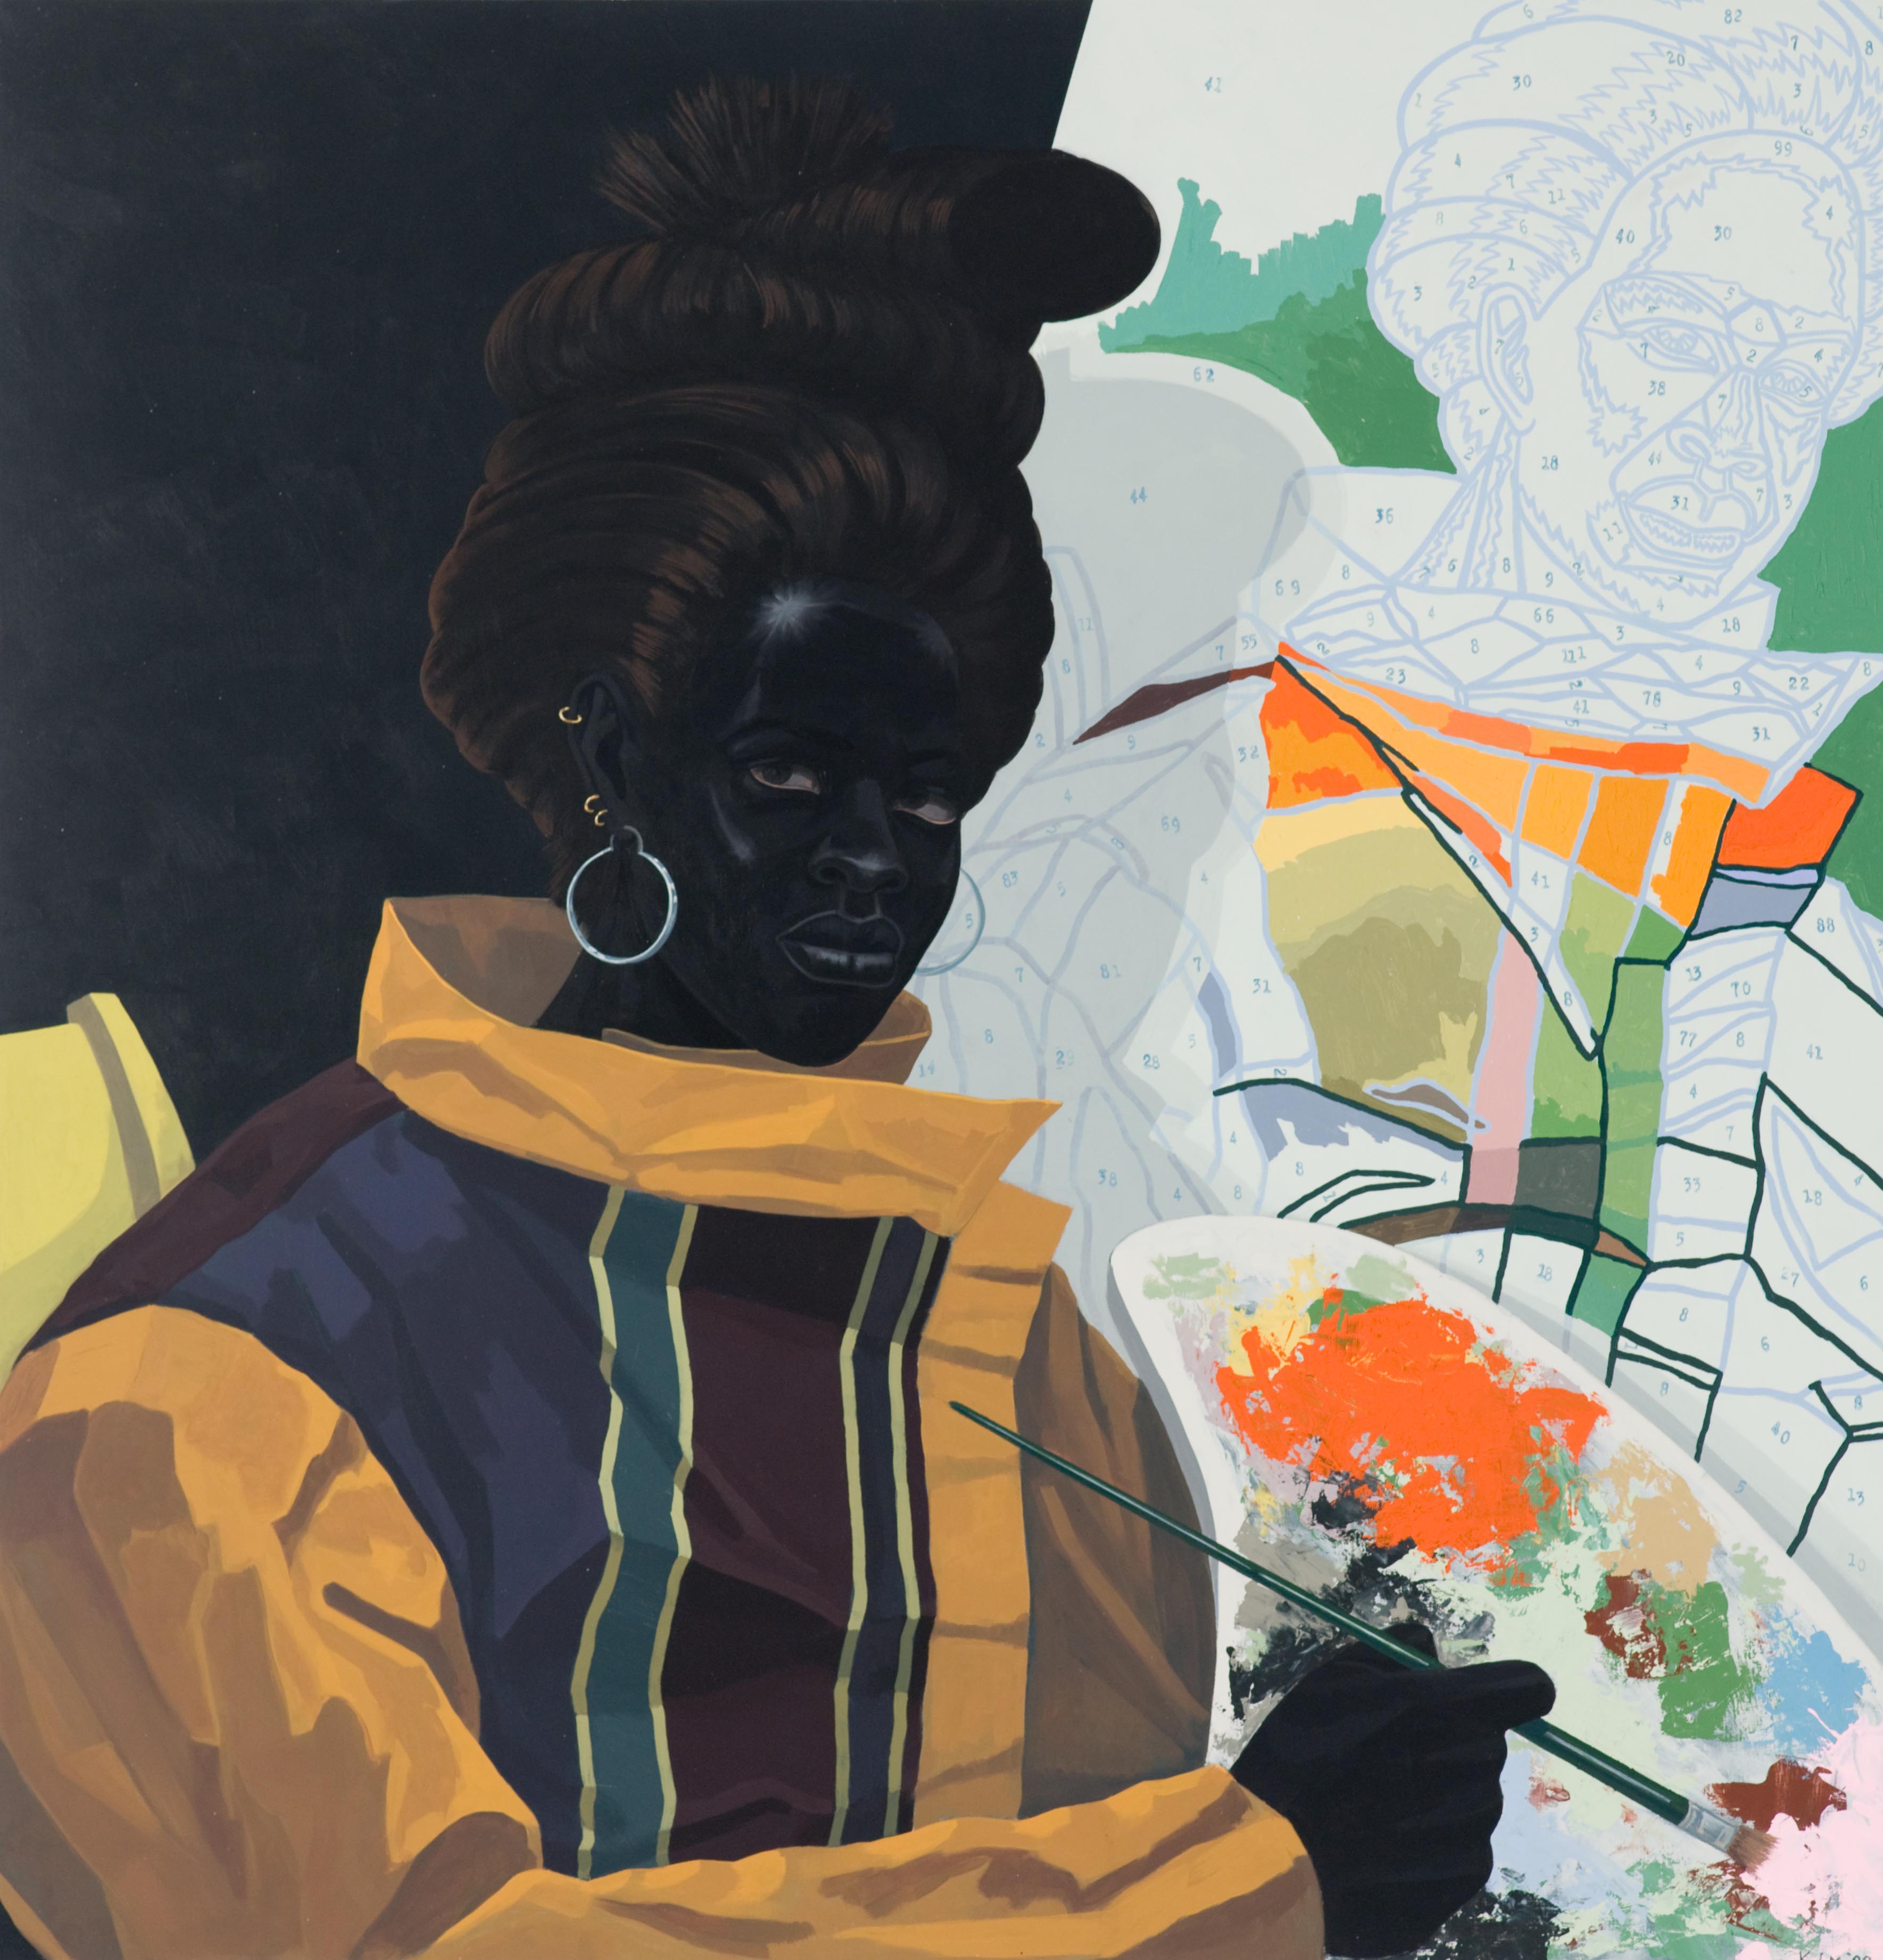 Kerry James Marshall. American, born Birmingham, Alabama 1955. Untitled (Painter) 2009. Acrylic on PVC panel 44 5/8 × 43 1/8 × 3 7/8 in. (113.3 × 109.5 × 9.8 cm). Museum of Contemporary Art Chicago, gift of Katherine S. Schamberg by exchange, 2009.15 © Kerry James Marshall Photo: Nathan Keay, © MCA Chicago.